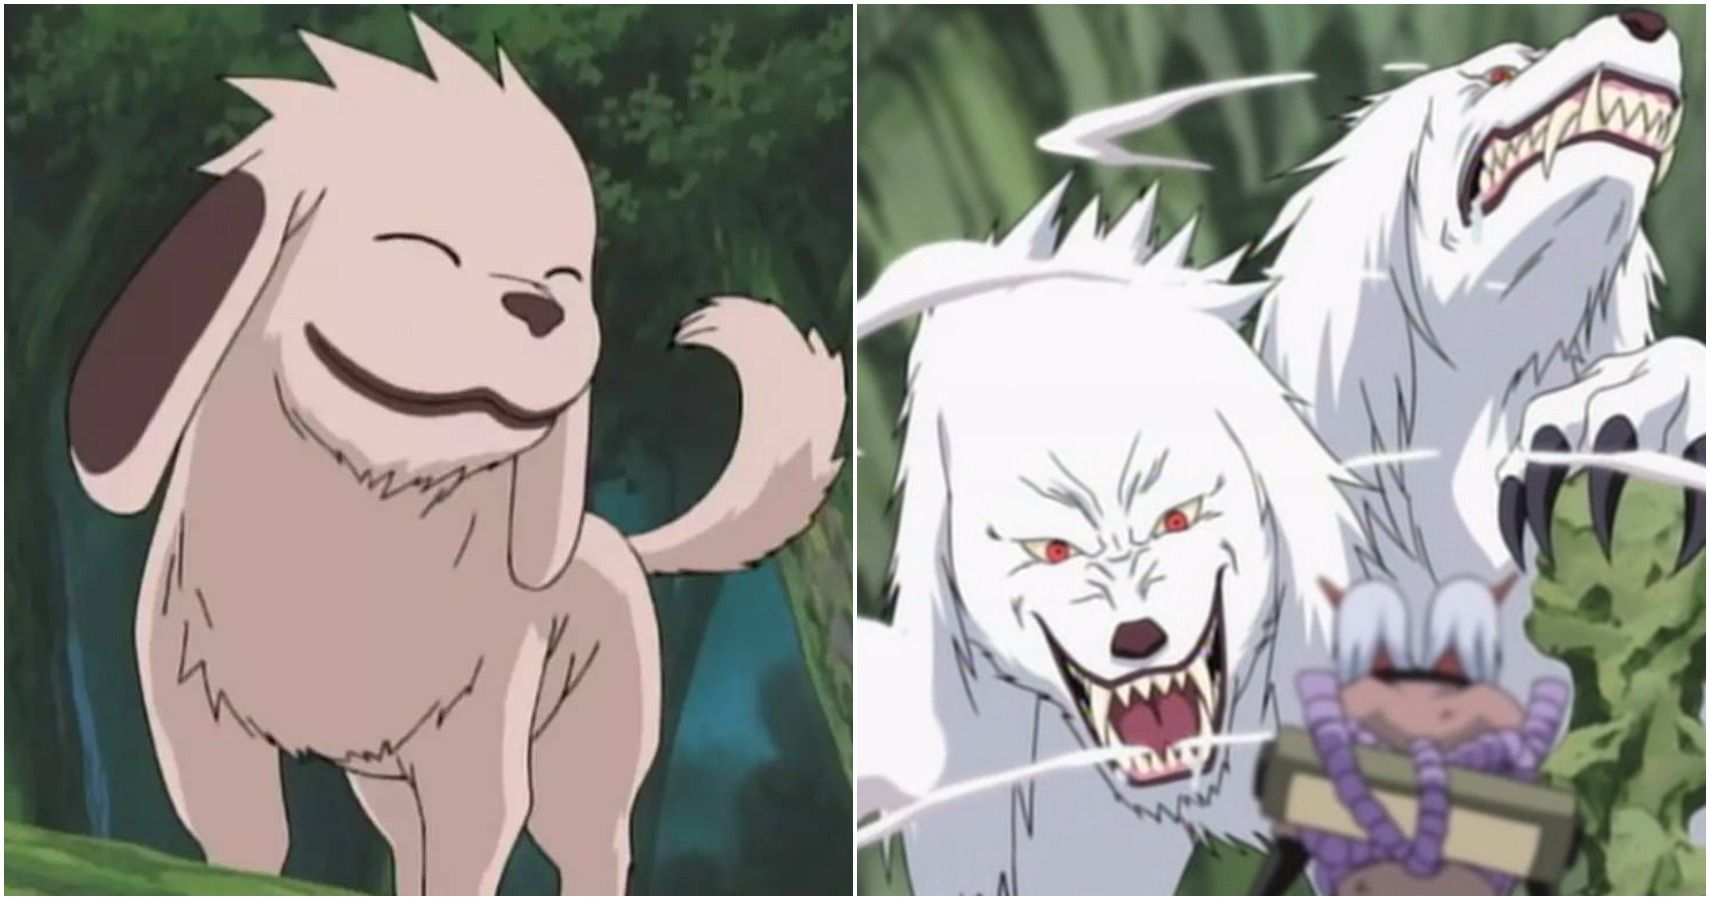 10 Adorable Anime Creatures That Are Secretly Horrifying